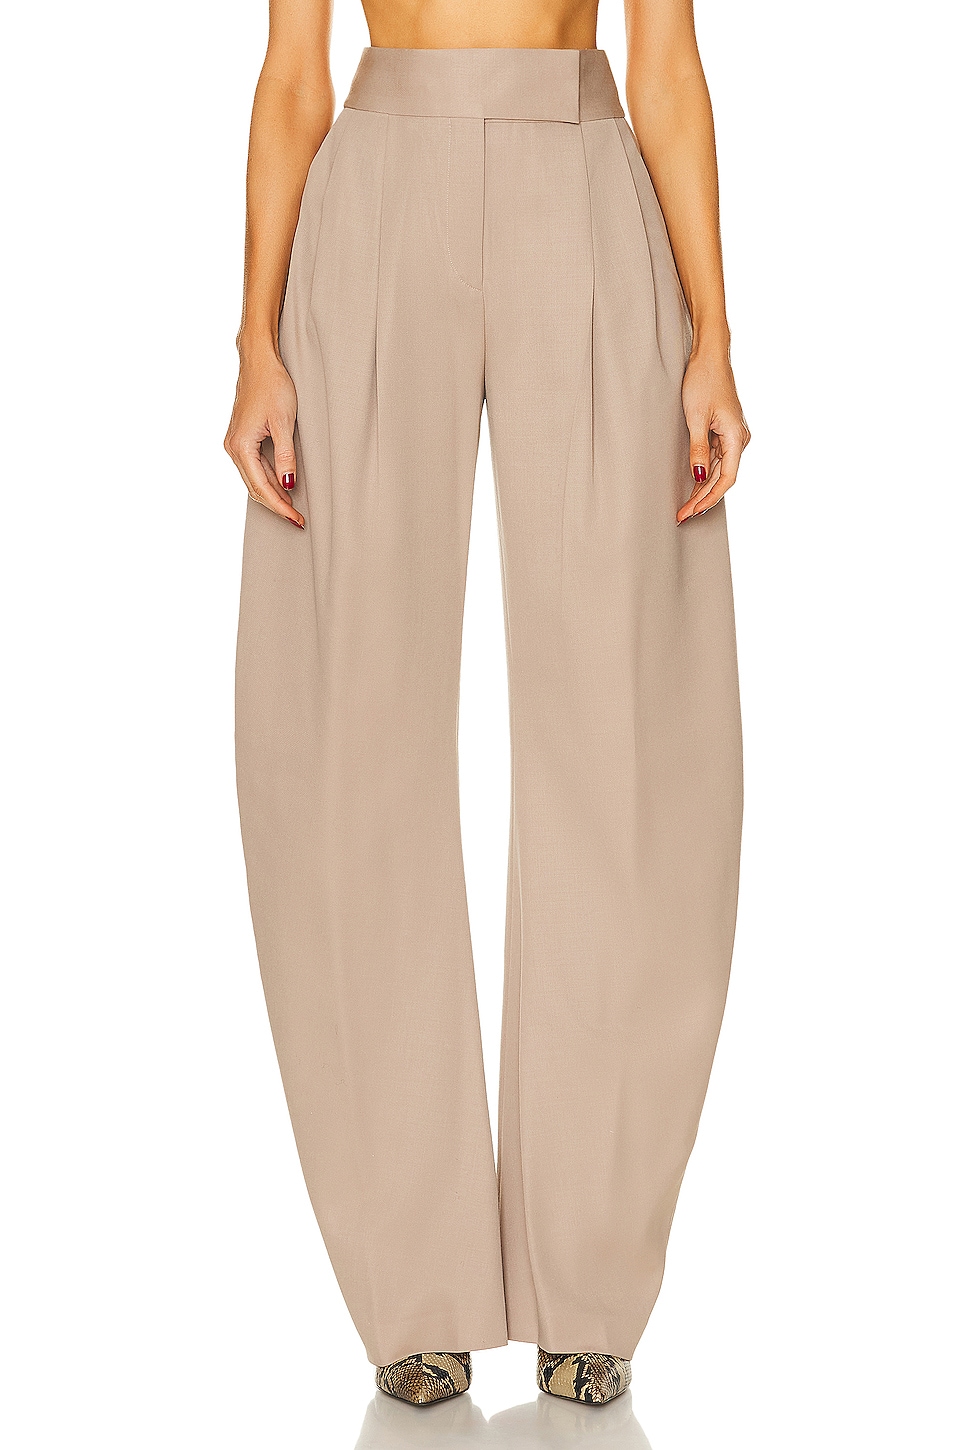 Image 1 of THE ATTICO Gary Long Pant in Beige